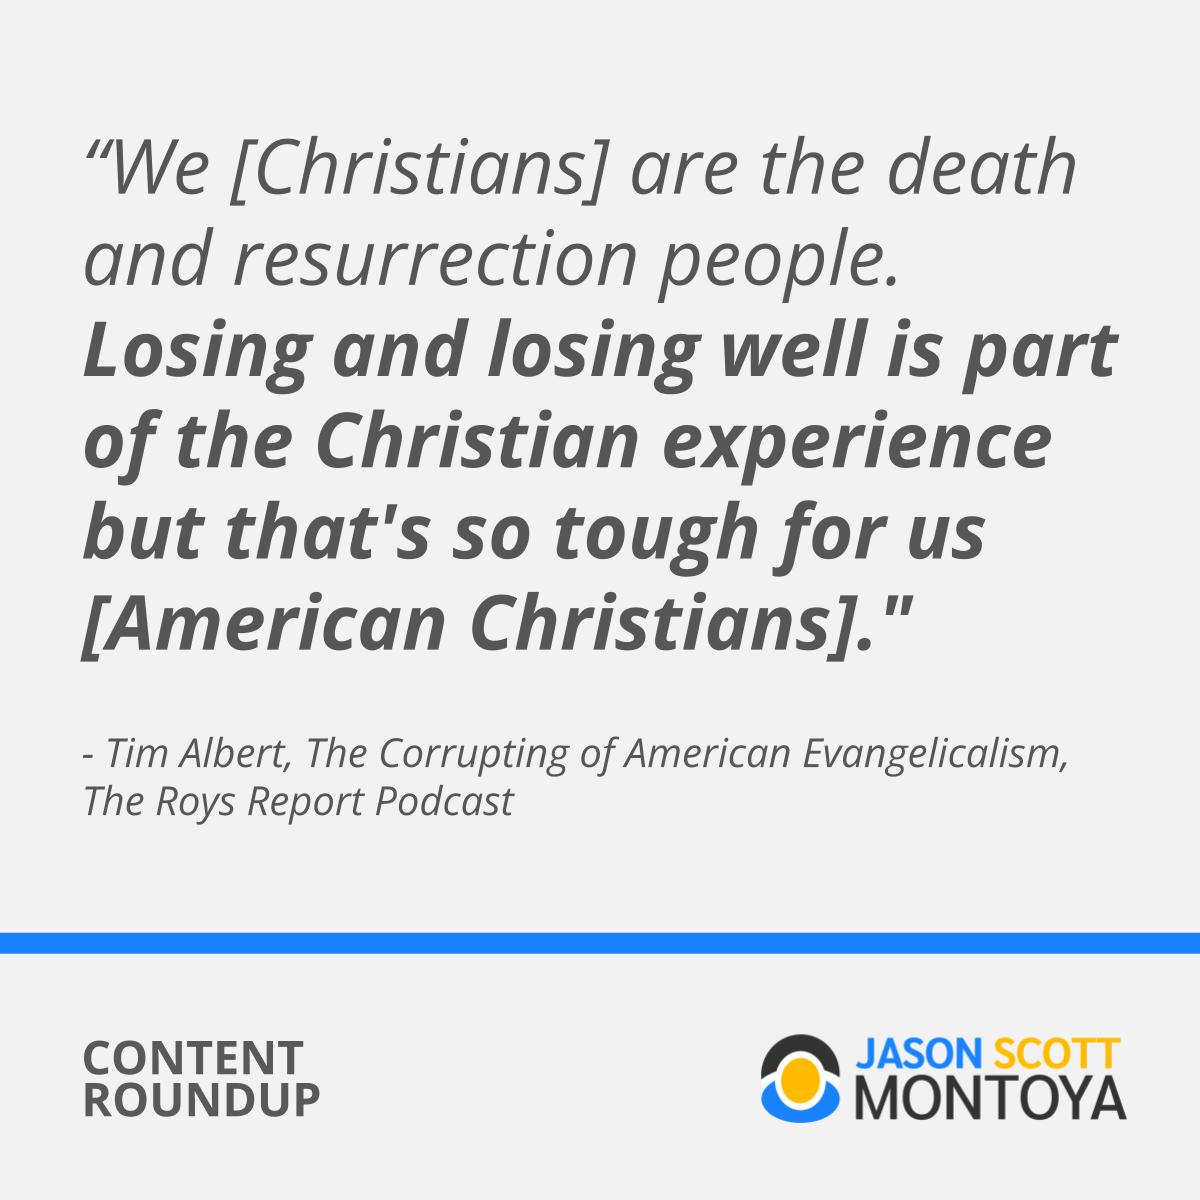 We [Christians] are the death and resurrection people. Losing and losing well is part of the Christian experience but that's so tough for us [American Christians].